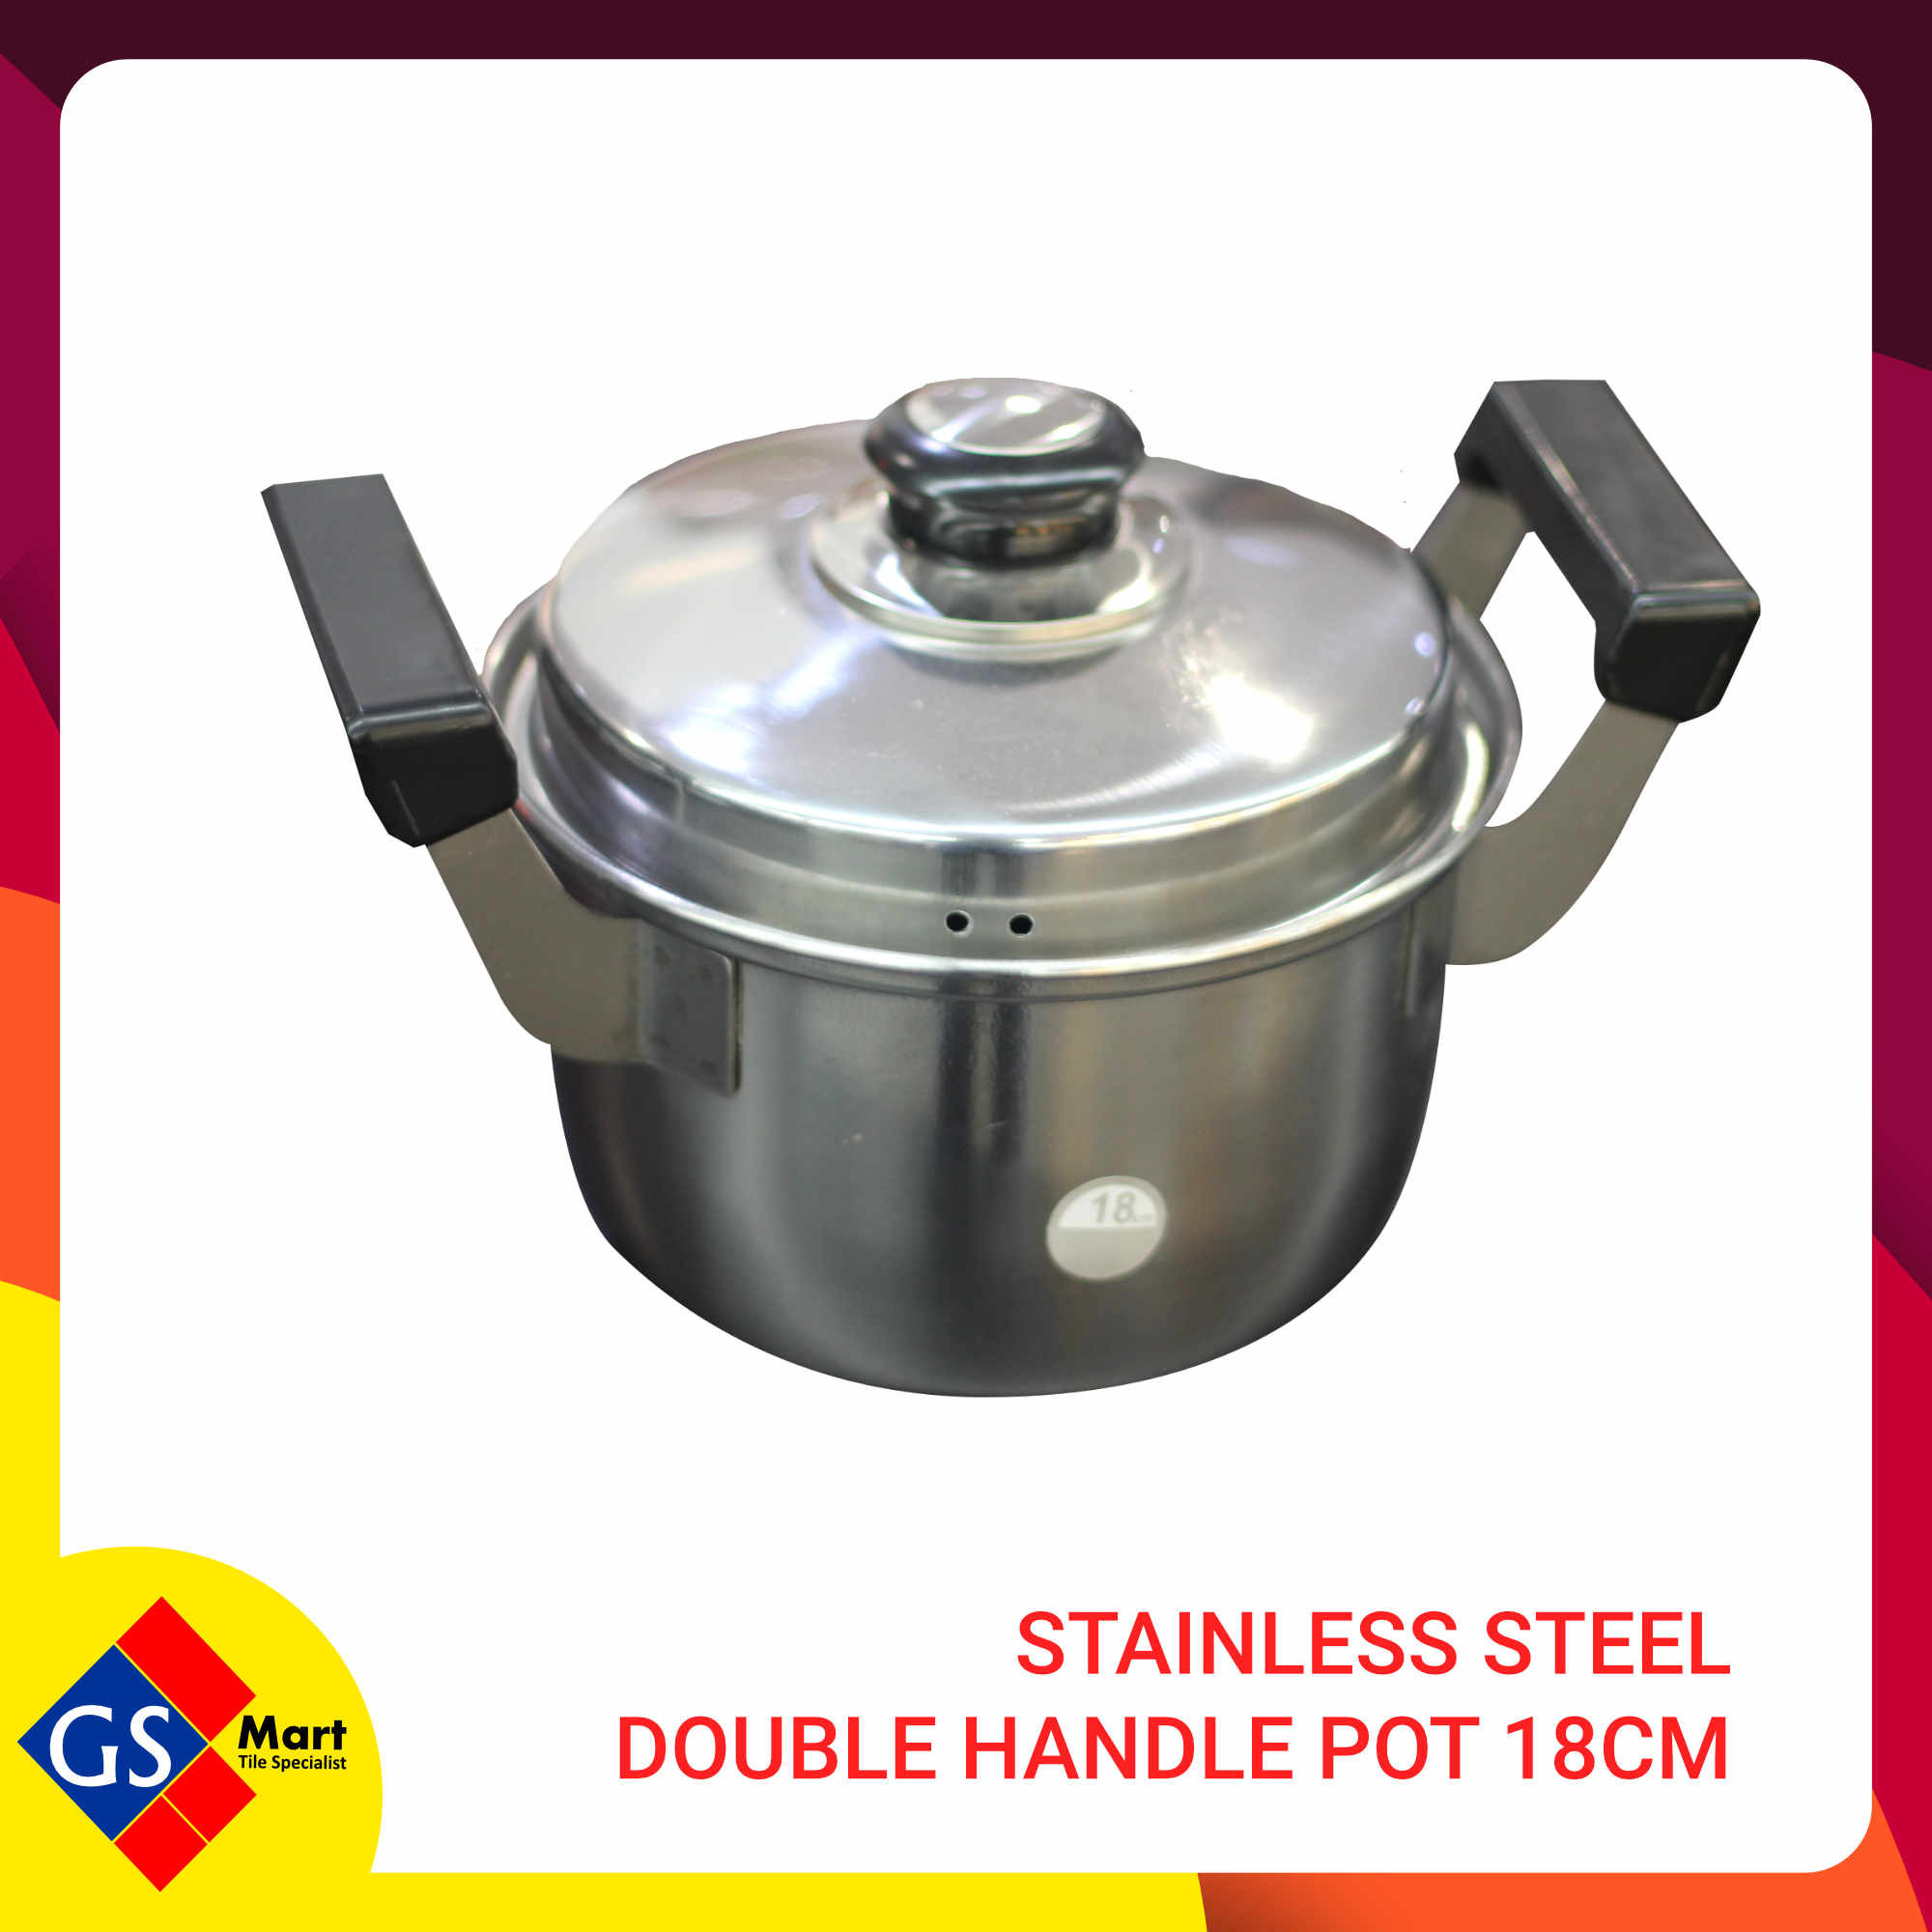 Stainless Steel Double Handle Pot 